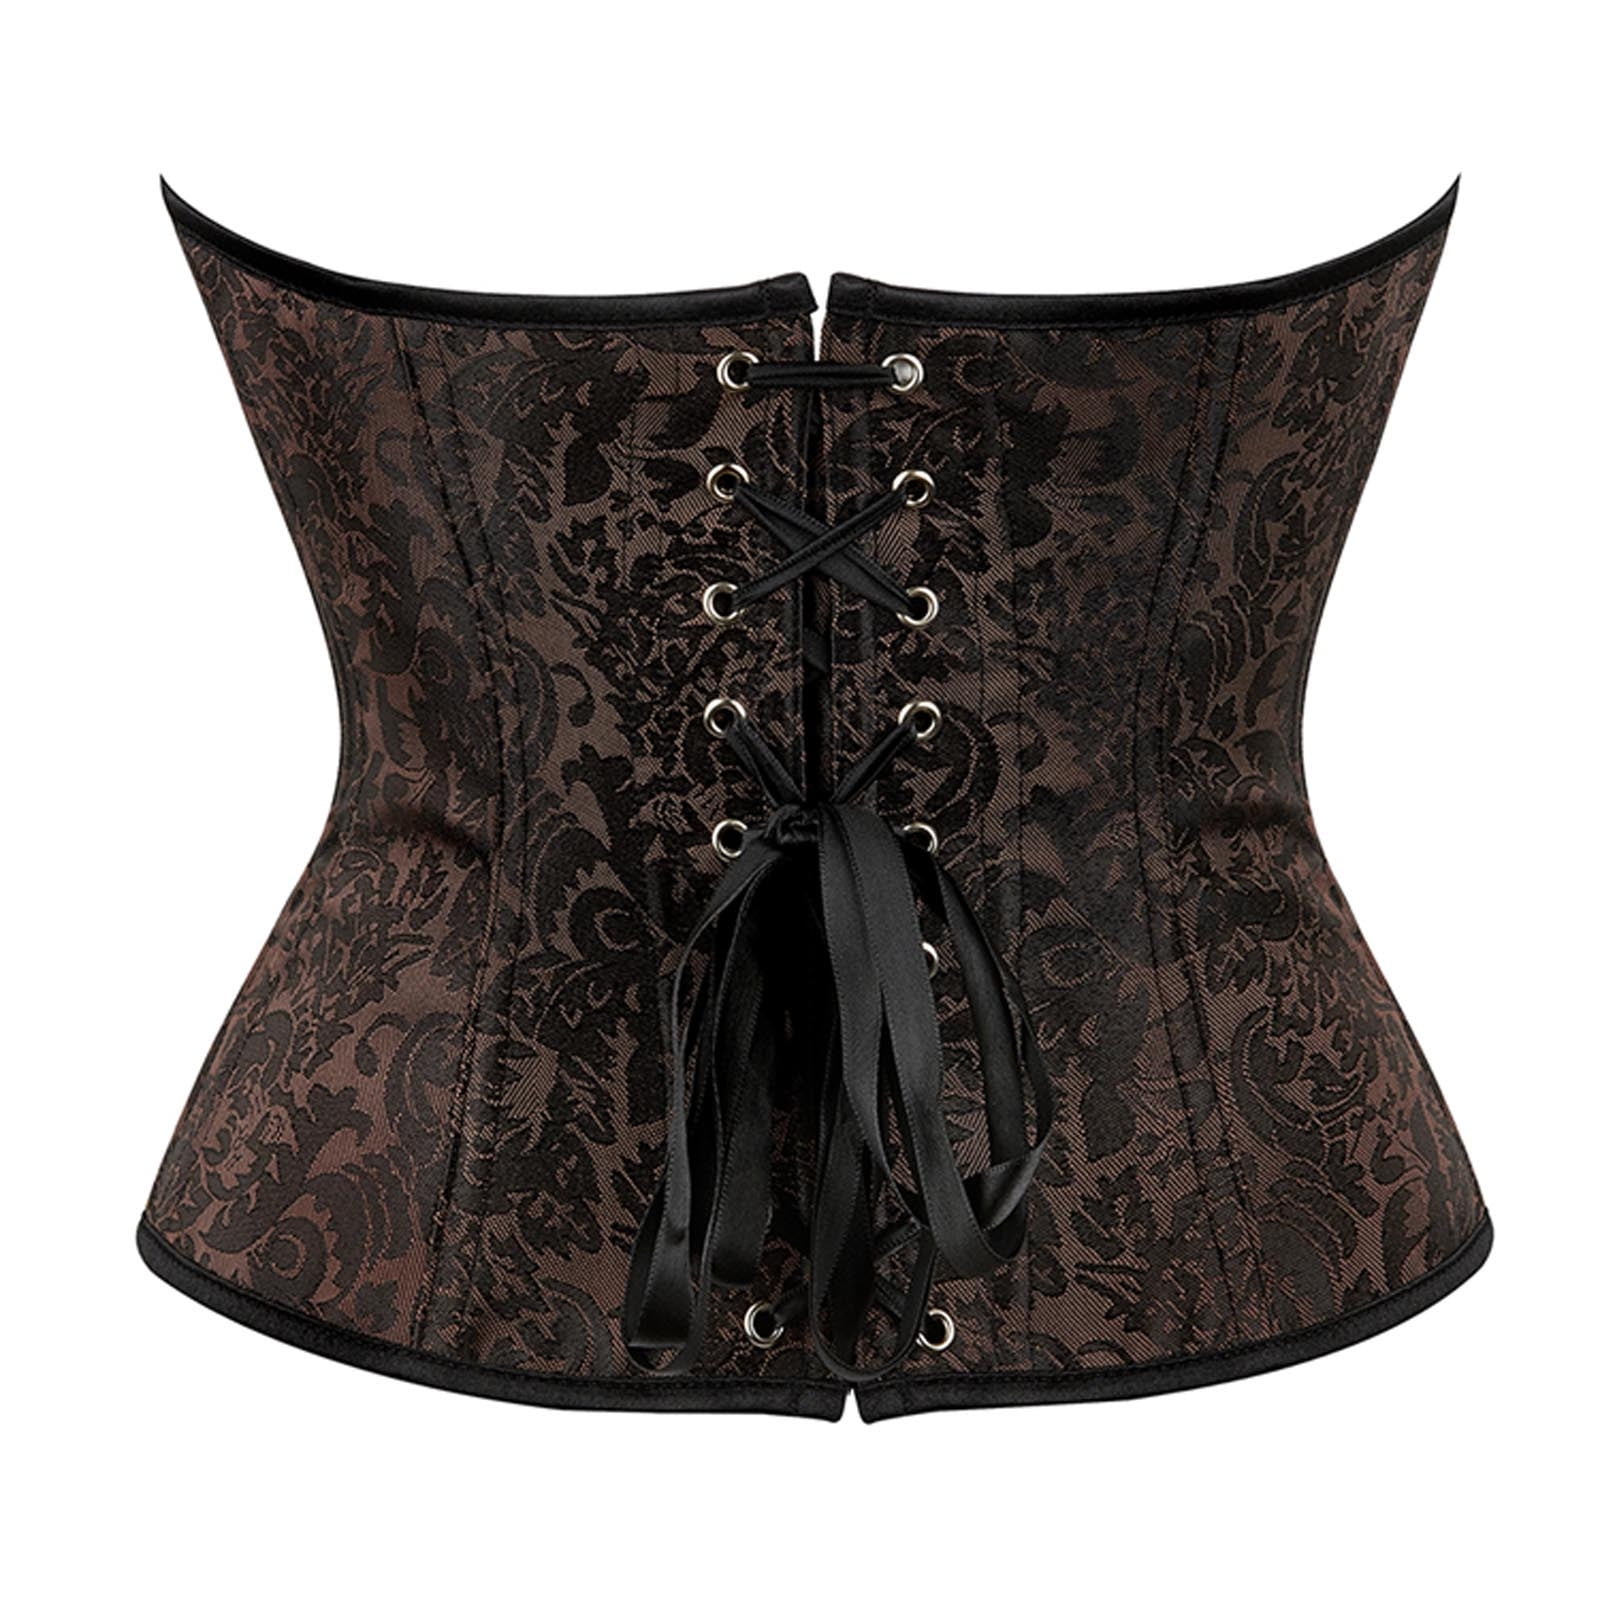 Aboser Women's Gothic Steampunk Corset Lace Up Boned Vintage Bustier Top  Waist Cincher Party Bodice Medieval Costumes 